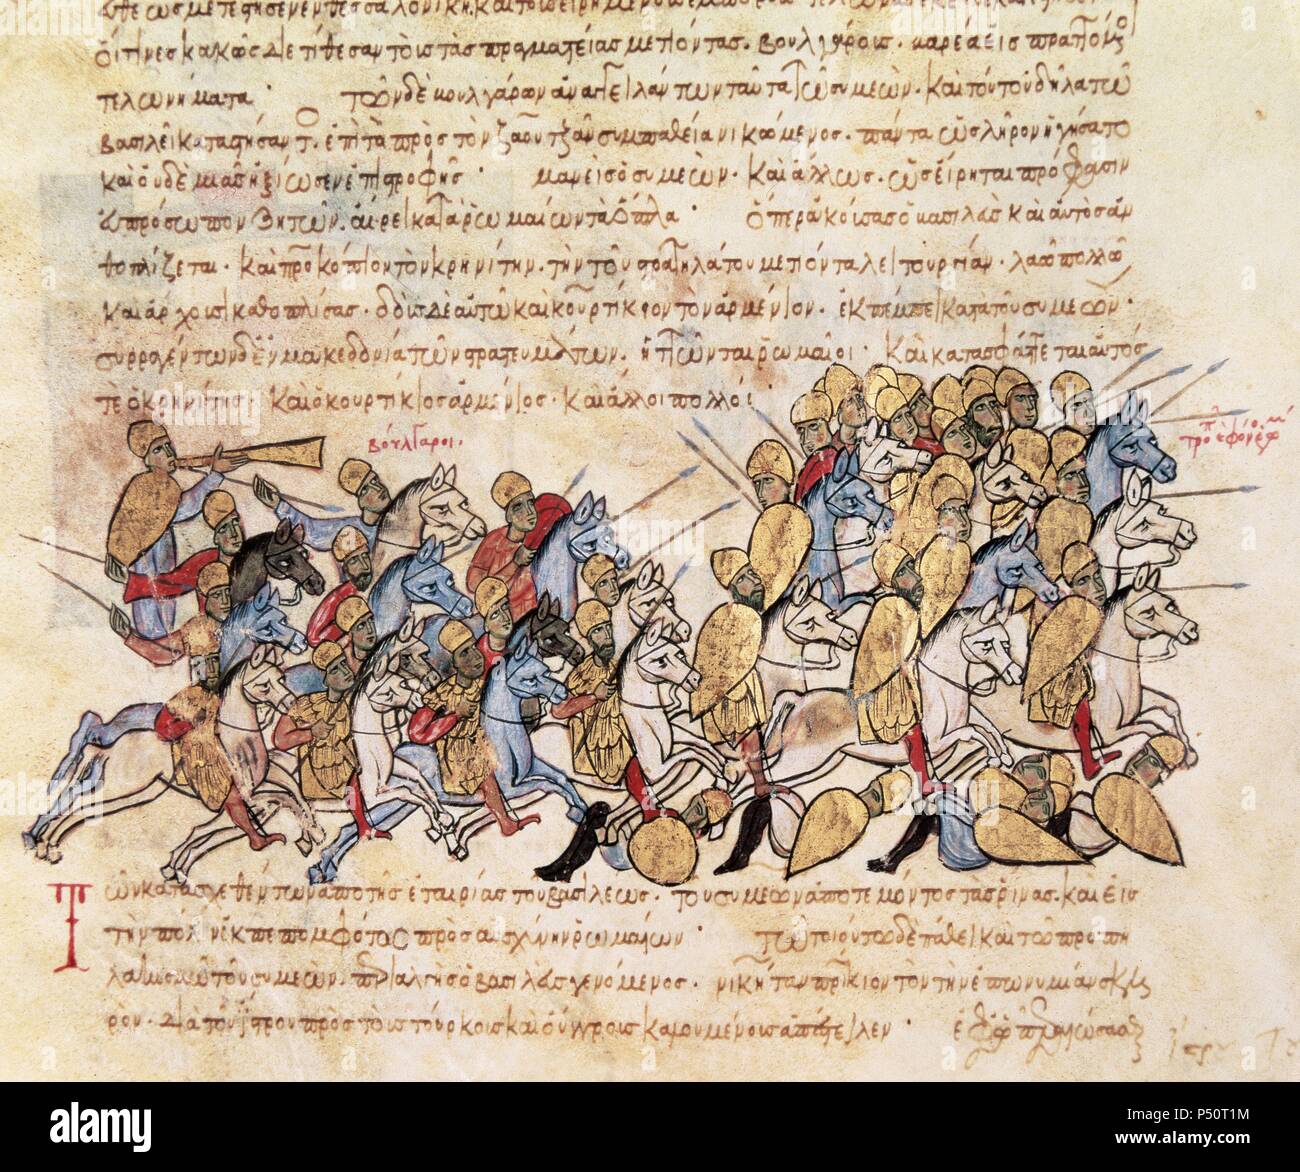 John Skylitzes. Synopsis of Histories. Battle between Hungarians and Bulgarians of Simeon I the Great (864-927) won by the Hungarians. Codex of the 12th century. National Library. Madrid. Spain. Stock Photo